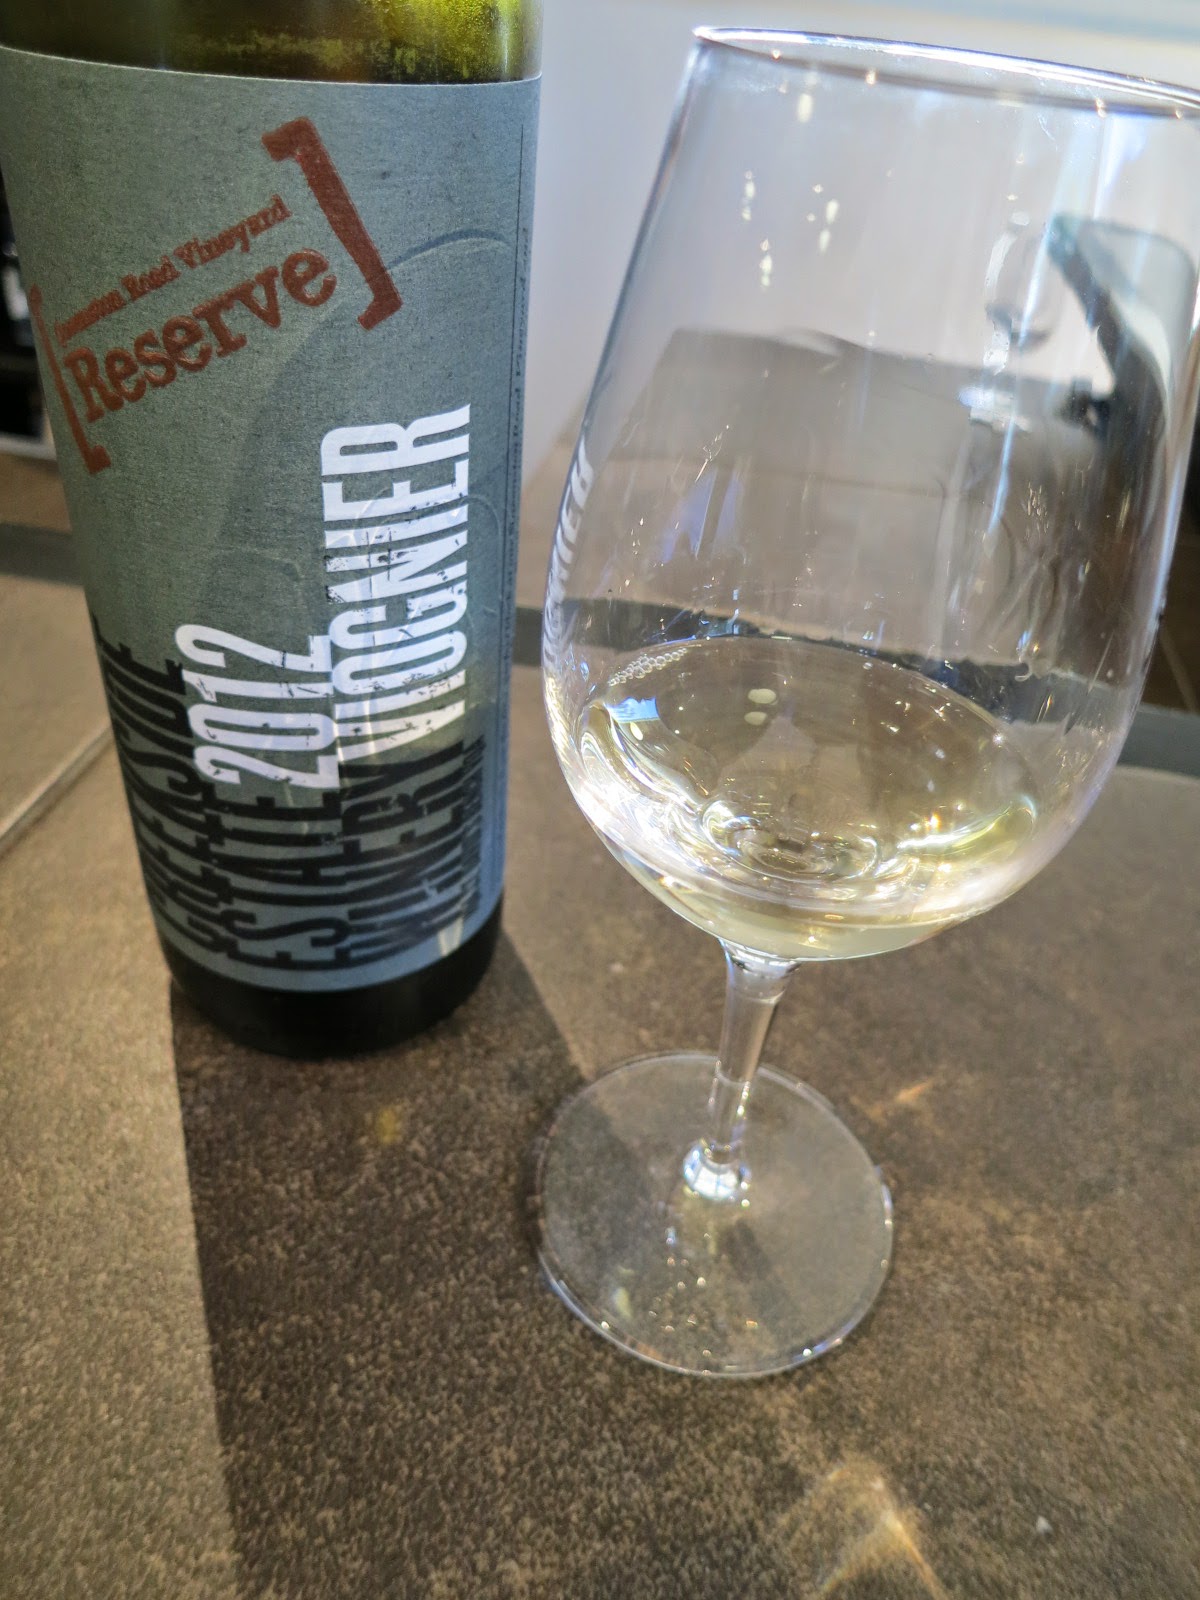 Wine Review of 2012 Creekside Reserve Viognier from Queenston Road Vineyard, VQA St. David's Bench